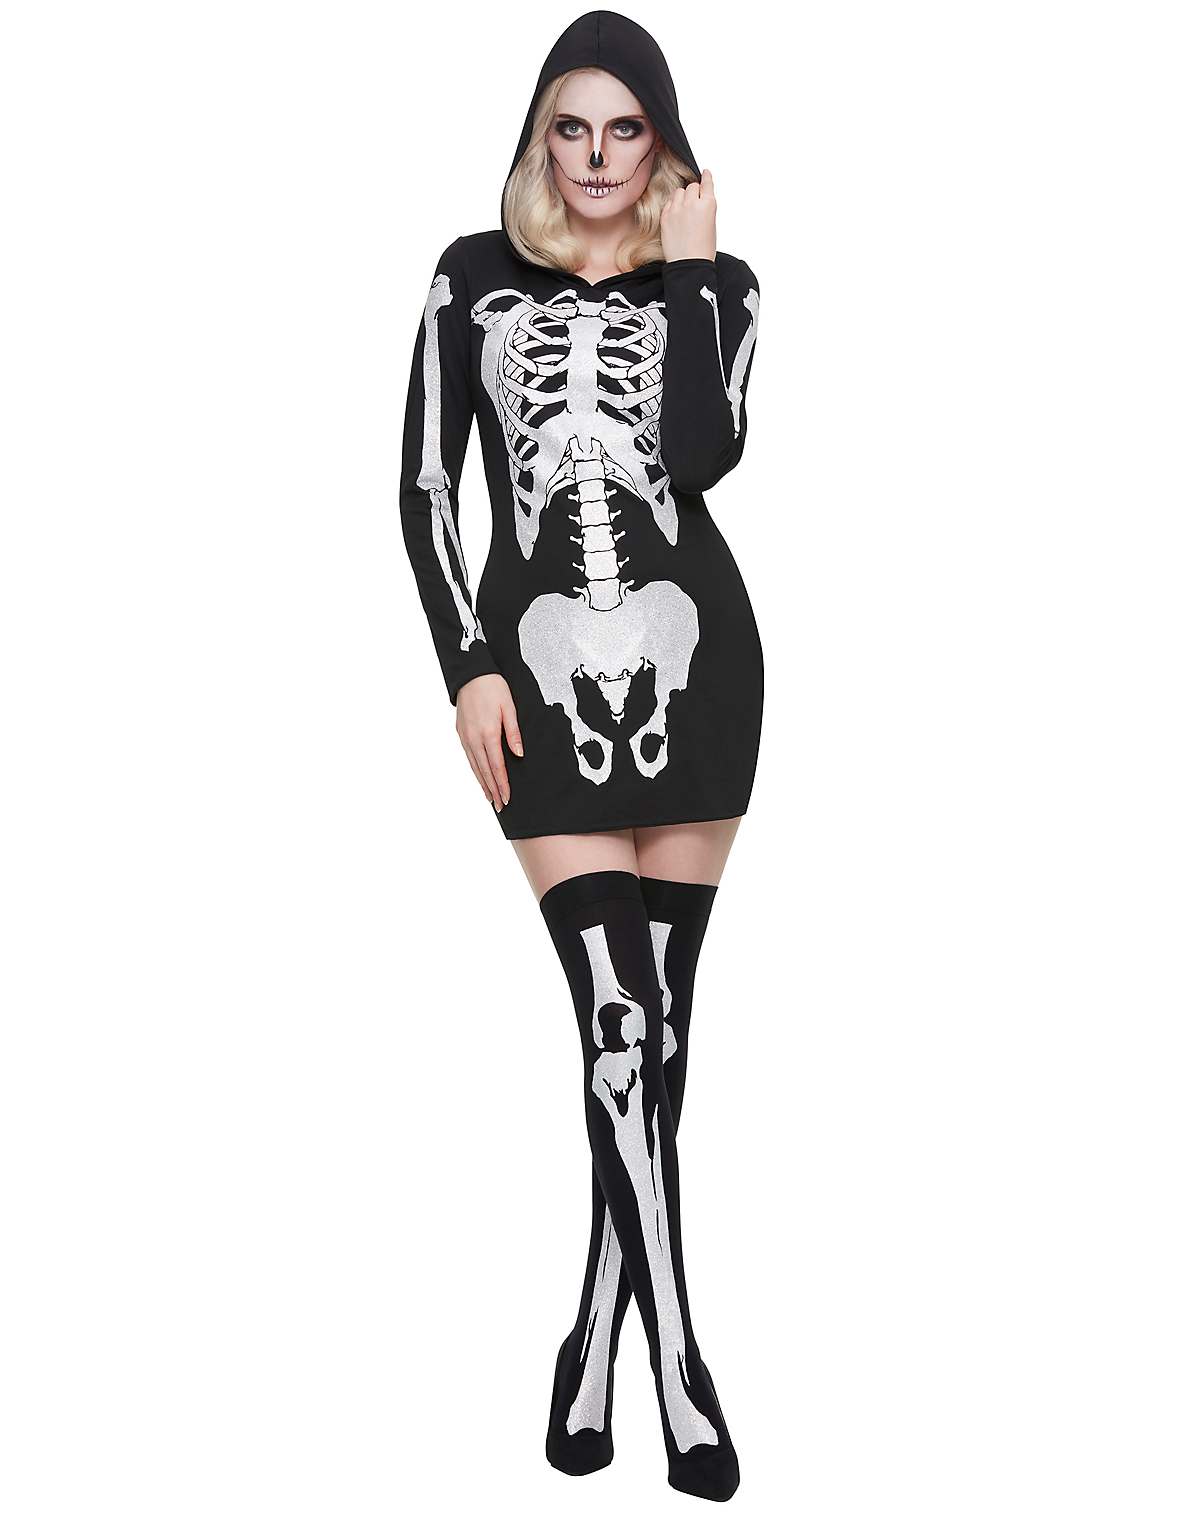 Hooded holographic skeleton costume